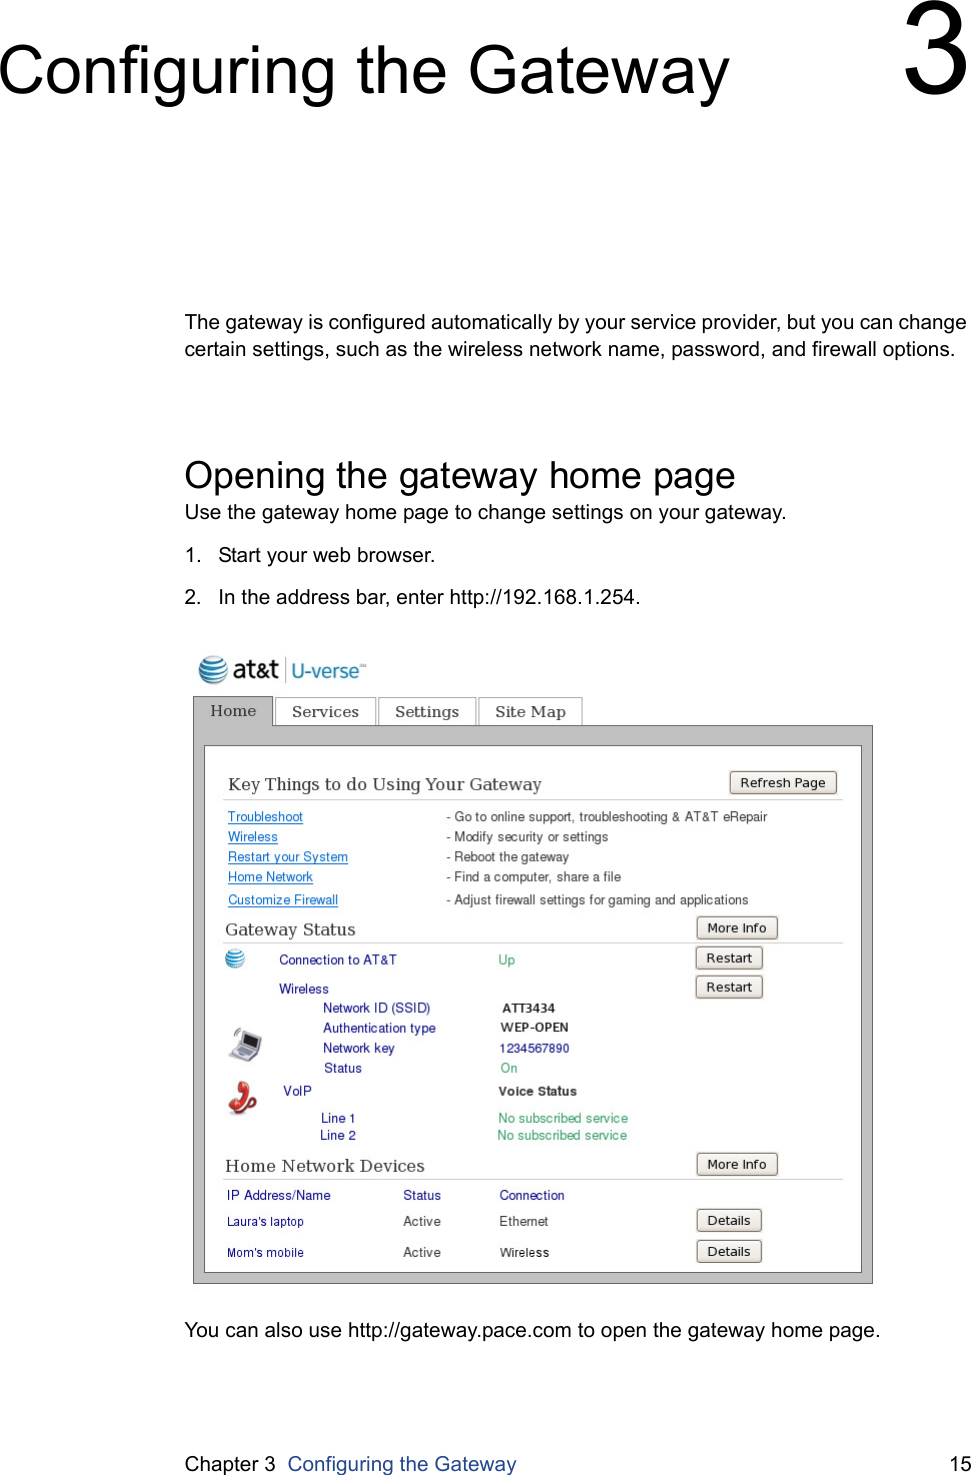 Chapter 3  Configuring the Gateway 15Configuring the Gateway 3The gateway is configured automatically by your service provider, but you can change certain settings, such as the wireless network name, password, and firewall options.Opening the gateway home pageUse the gateway home page to change settings on your gateway.1. Start your web browser.2. In the address bar, enter http://192.168.1.254.You can also use http://gateway.pace.com to open the gateway home page.